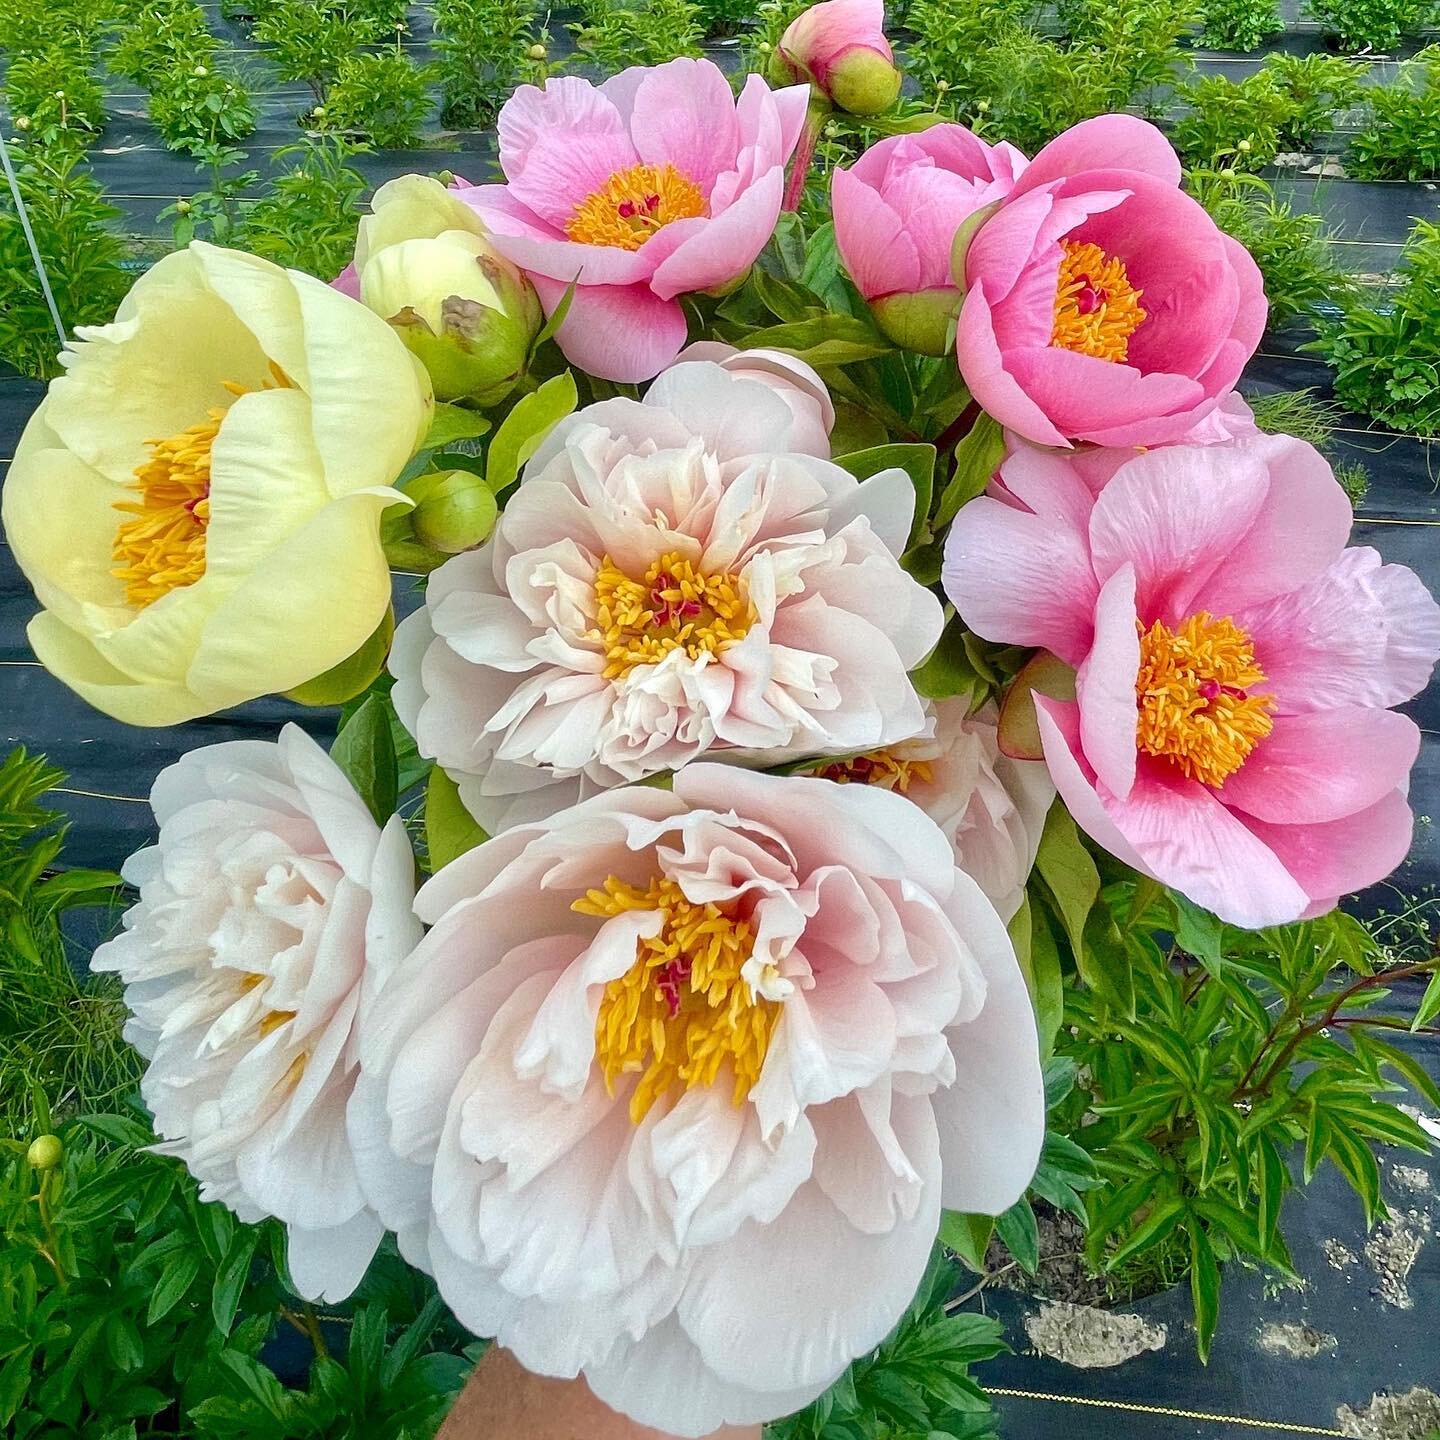 Look what happened when I wasn&rsquo;t looking and was instead occupied with prepping tulips and trying to save ranunculus from frying - the peonies are opening! 

Pictured are Blushing Princess, Soft Salmon Saucer, and Lemon Chiffon! SO EXCITED!!!